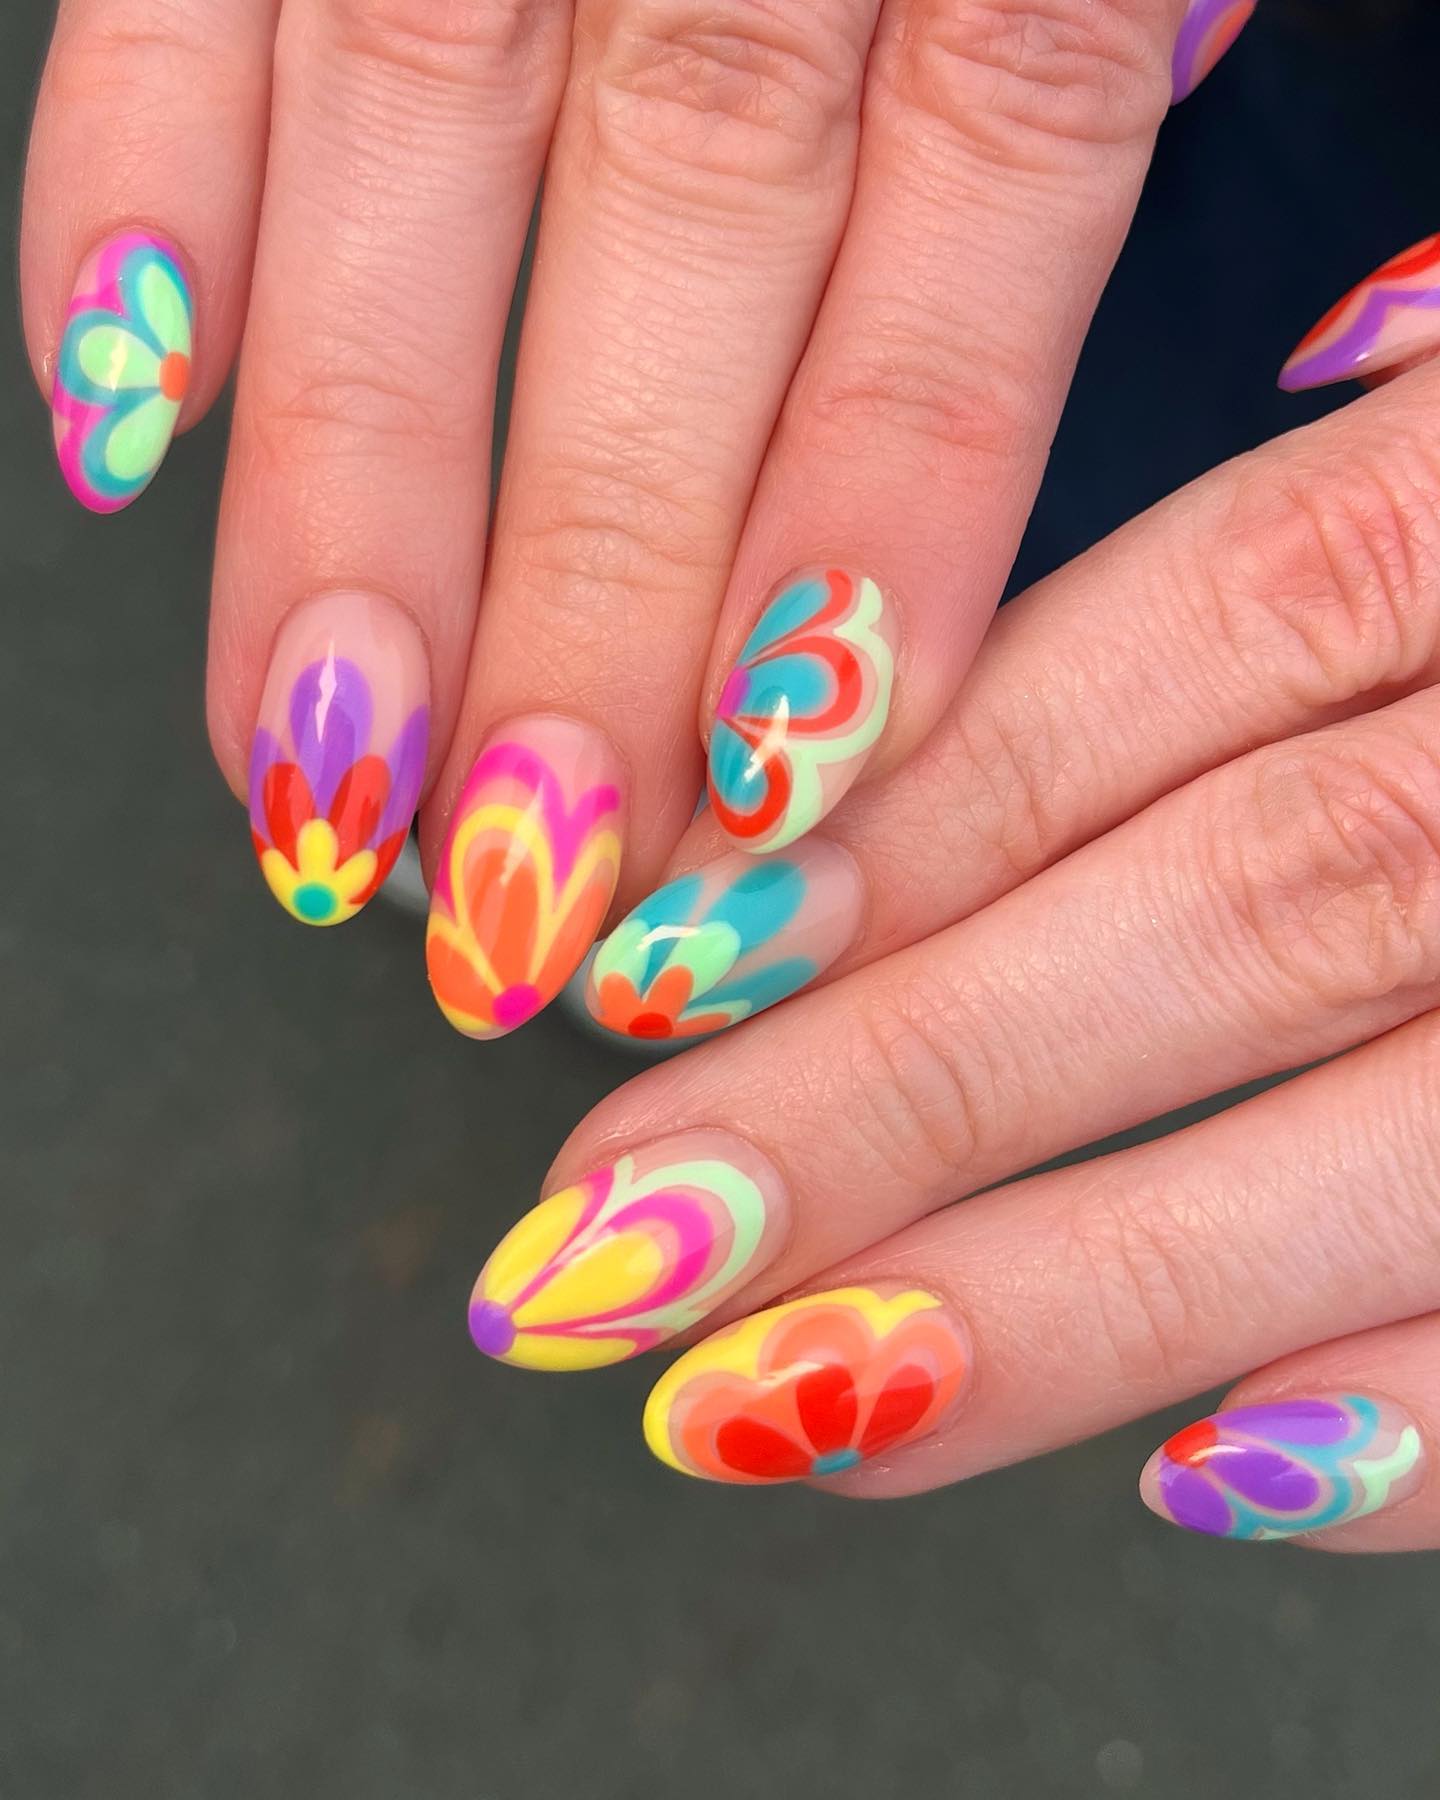 58 Summer Nail Art Designs We'Ve Bookmarked - Beauty Bay Edited